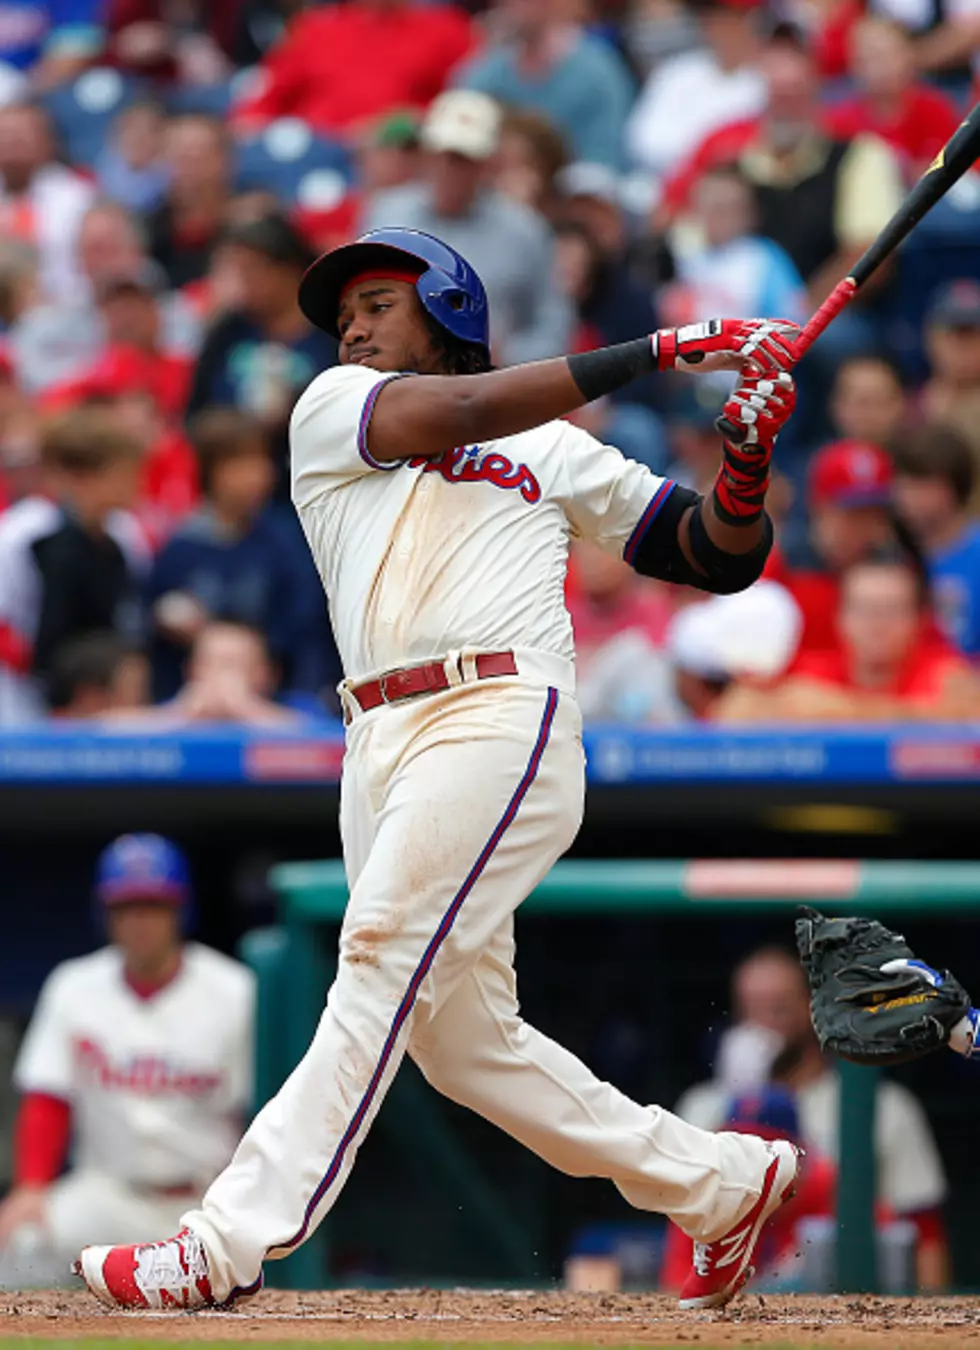 What Are Expectations for Maikel Franco In 2017?